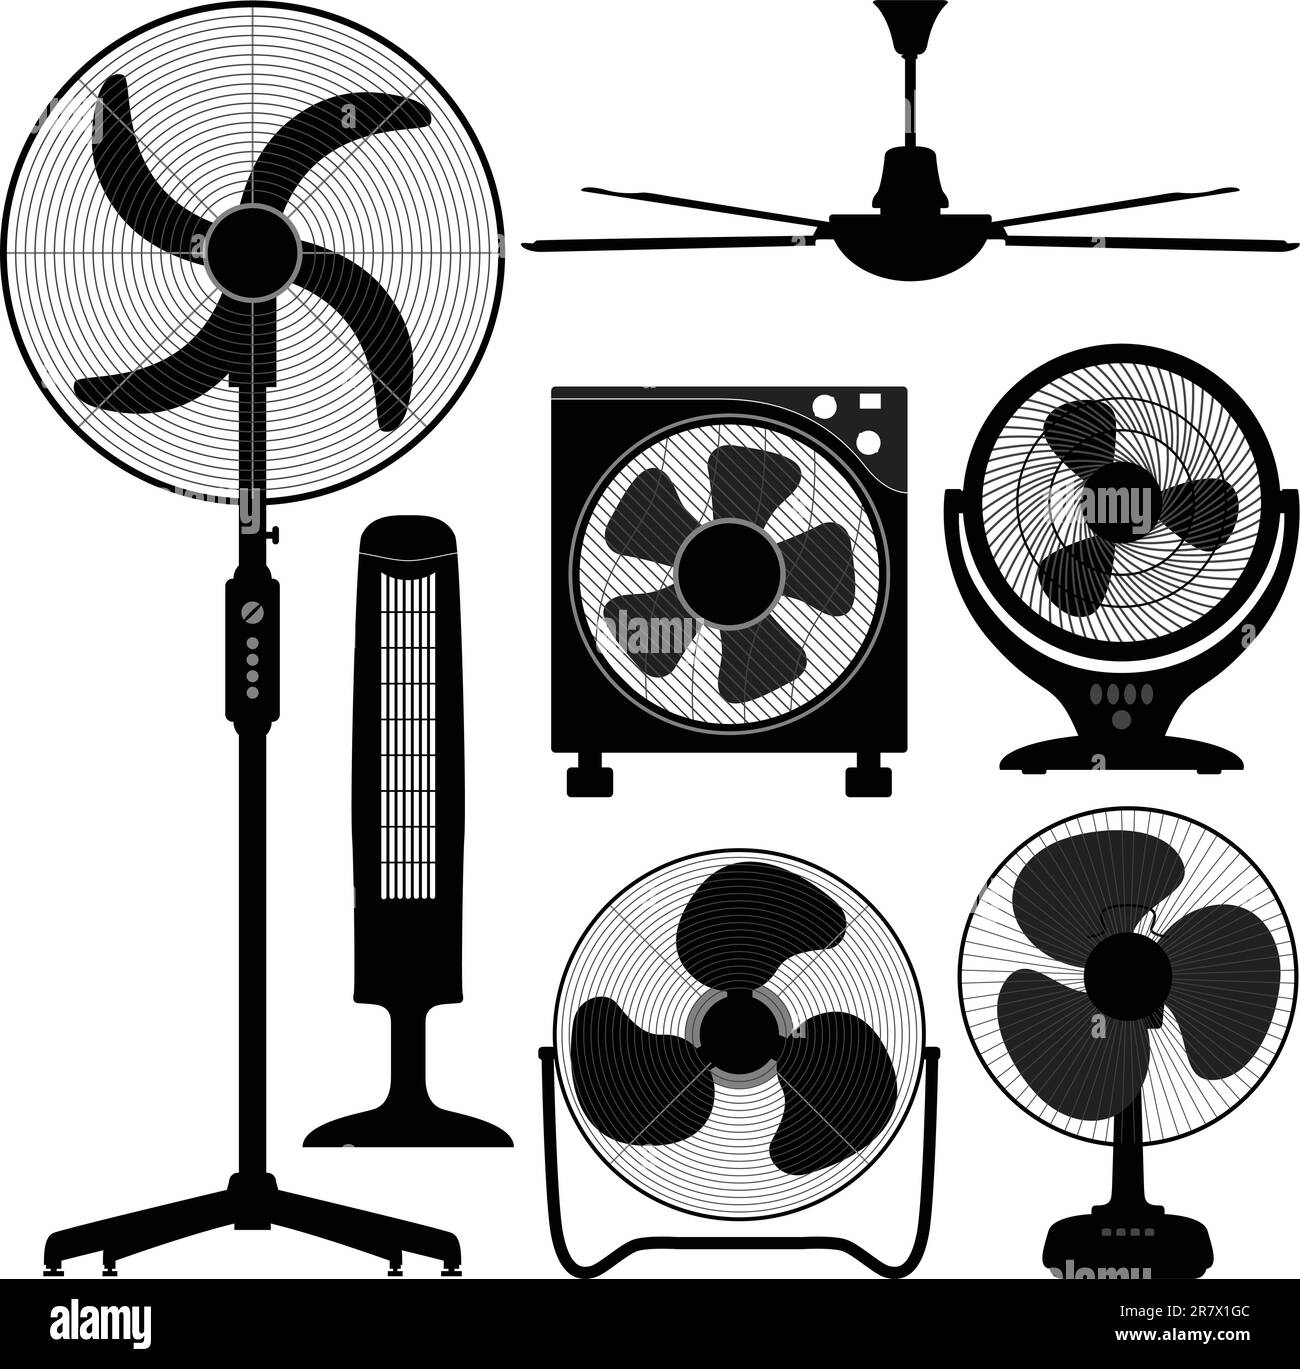 A set of fan design for different purposes. Stock Vector